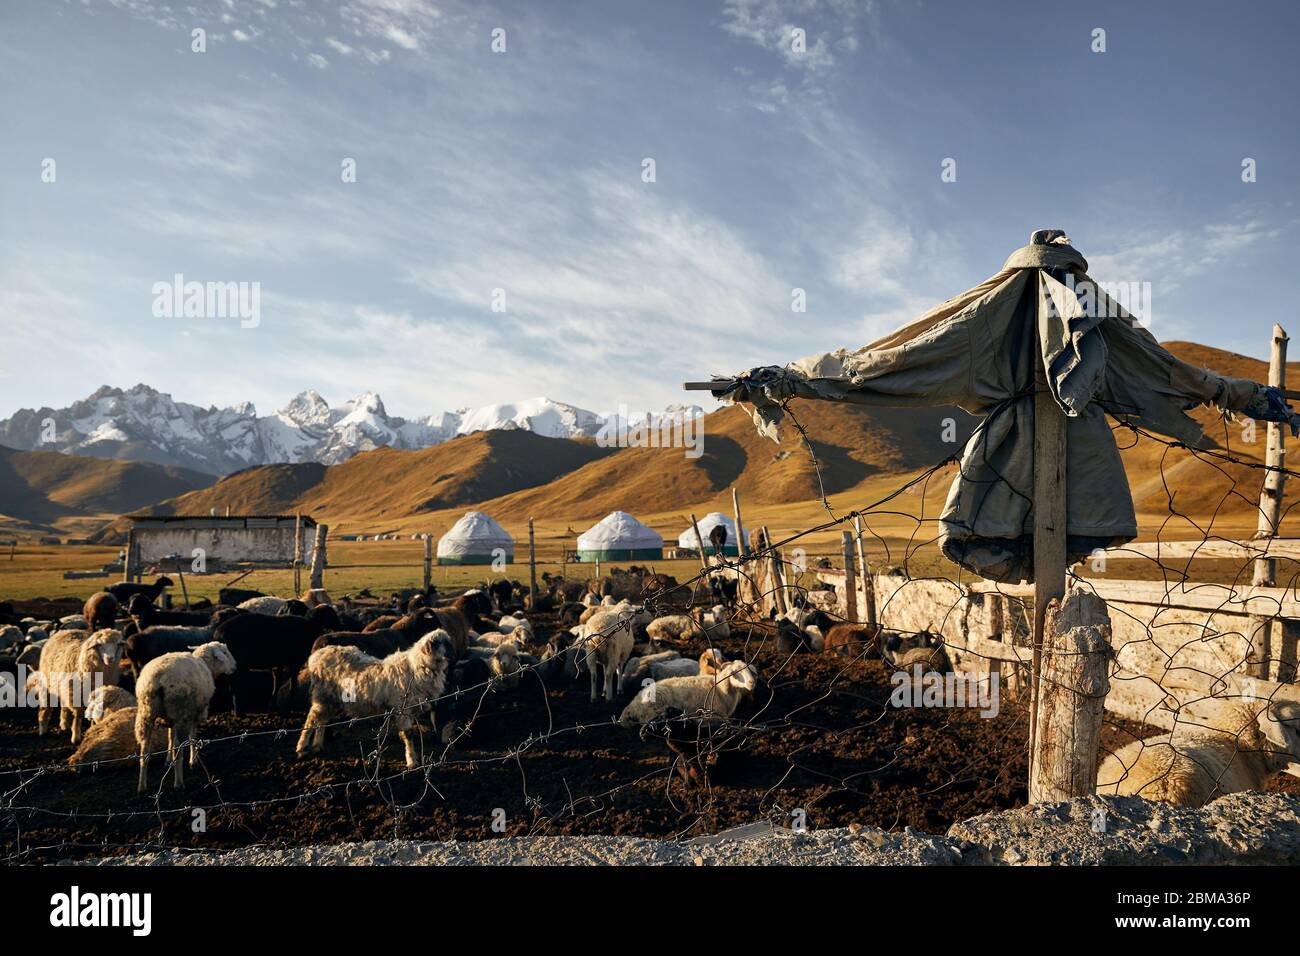 Scarecrow from jacket and corral with sheep herd near yurt nomadic camp and canteen building at mountain valley in Central Asia Stock Photo